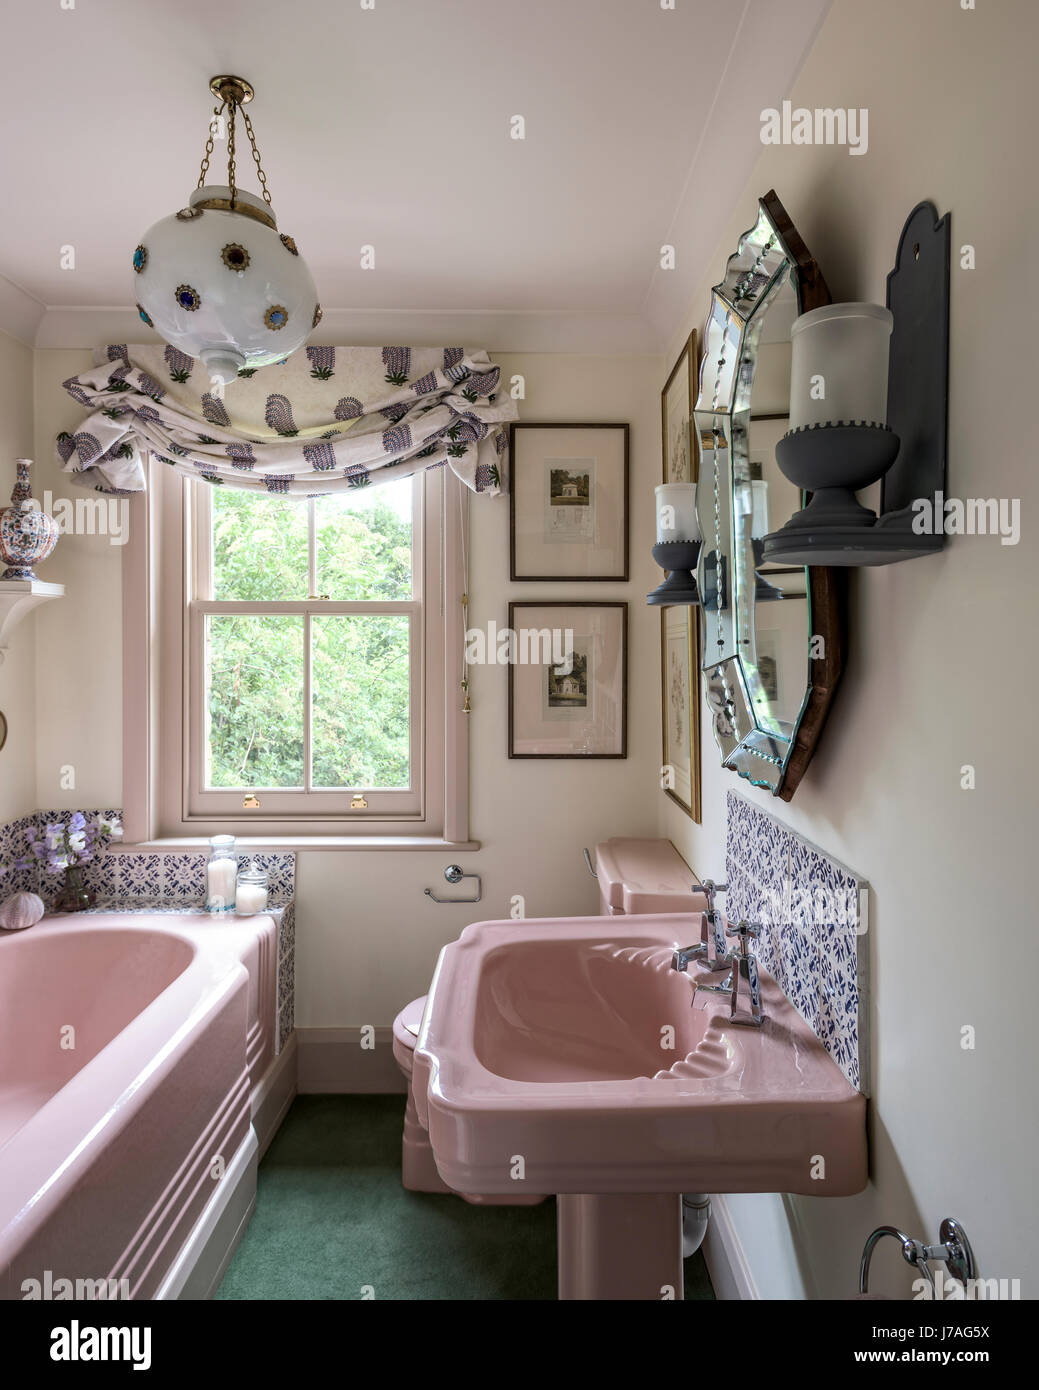 Pink enamelled cast iron bath and basin in bathroom with Fired Earth tiles and ornate gilt mirror Stock Photo